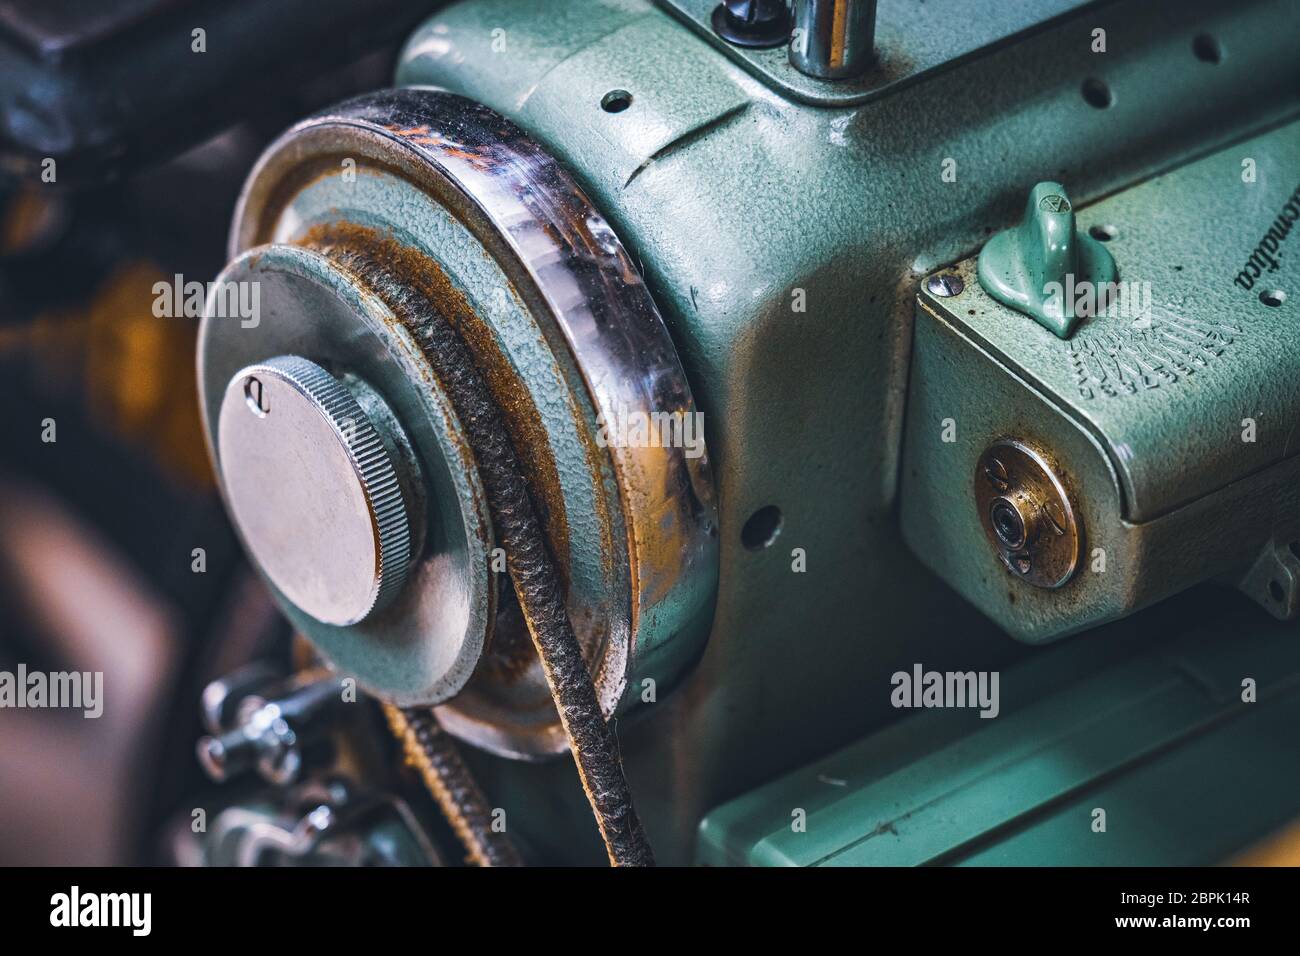 Old Machine for Darning, Thread, Buttons Stock Photo - Image of closeup,  blue: 130878406